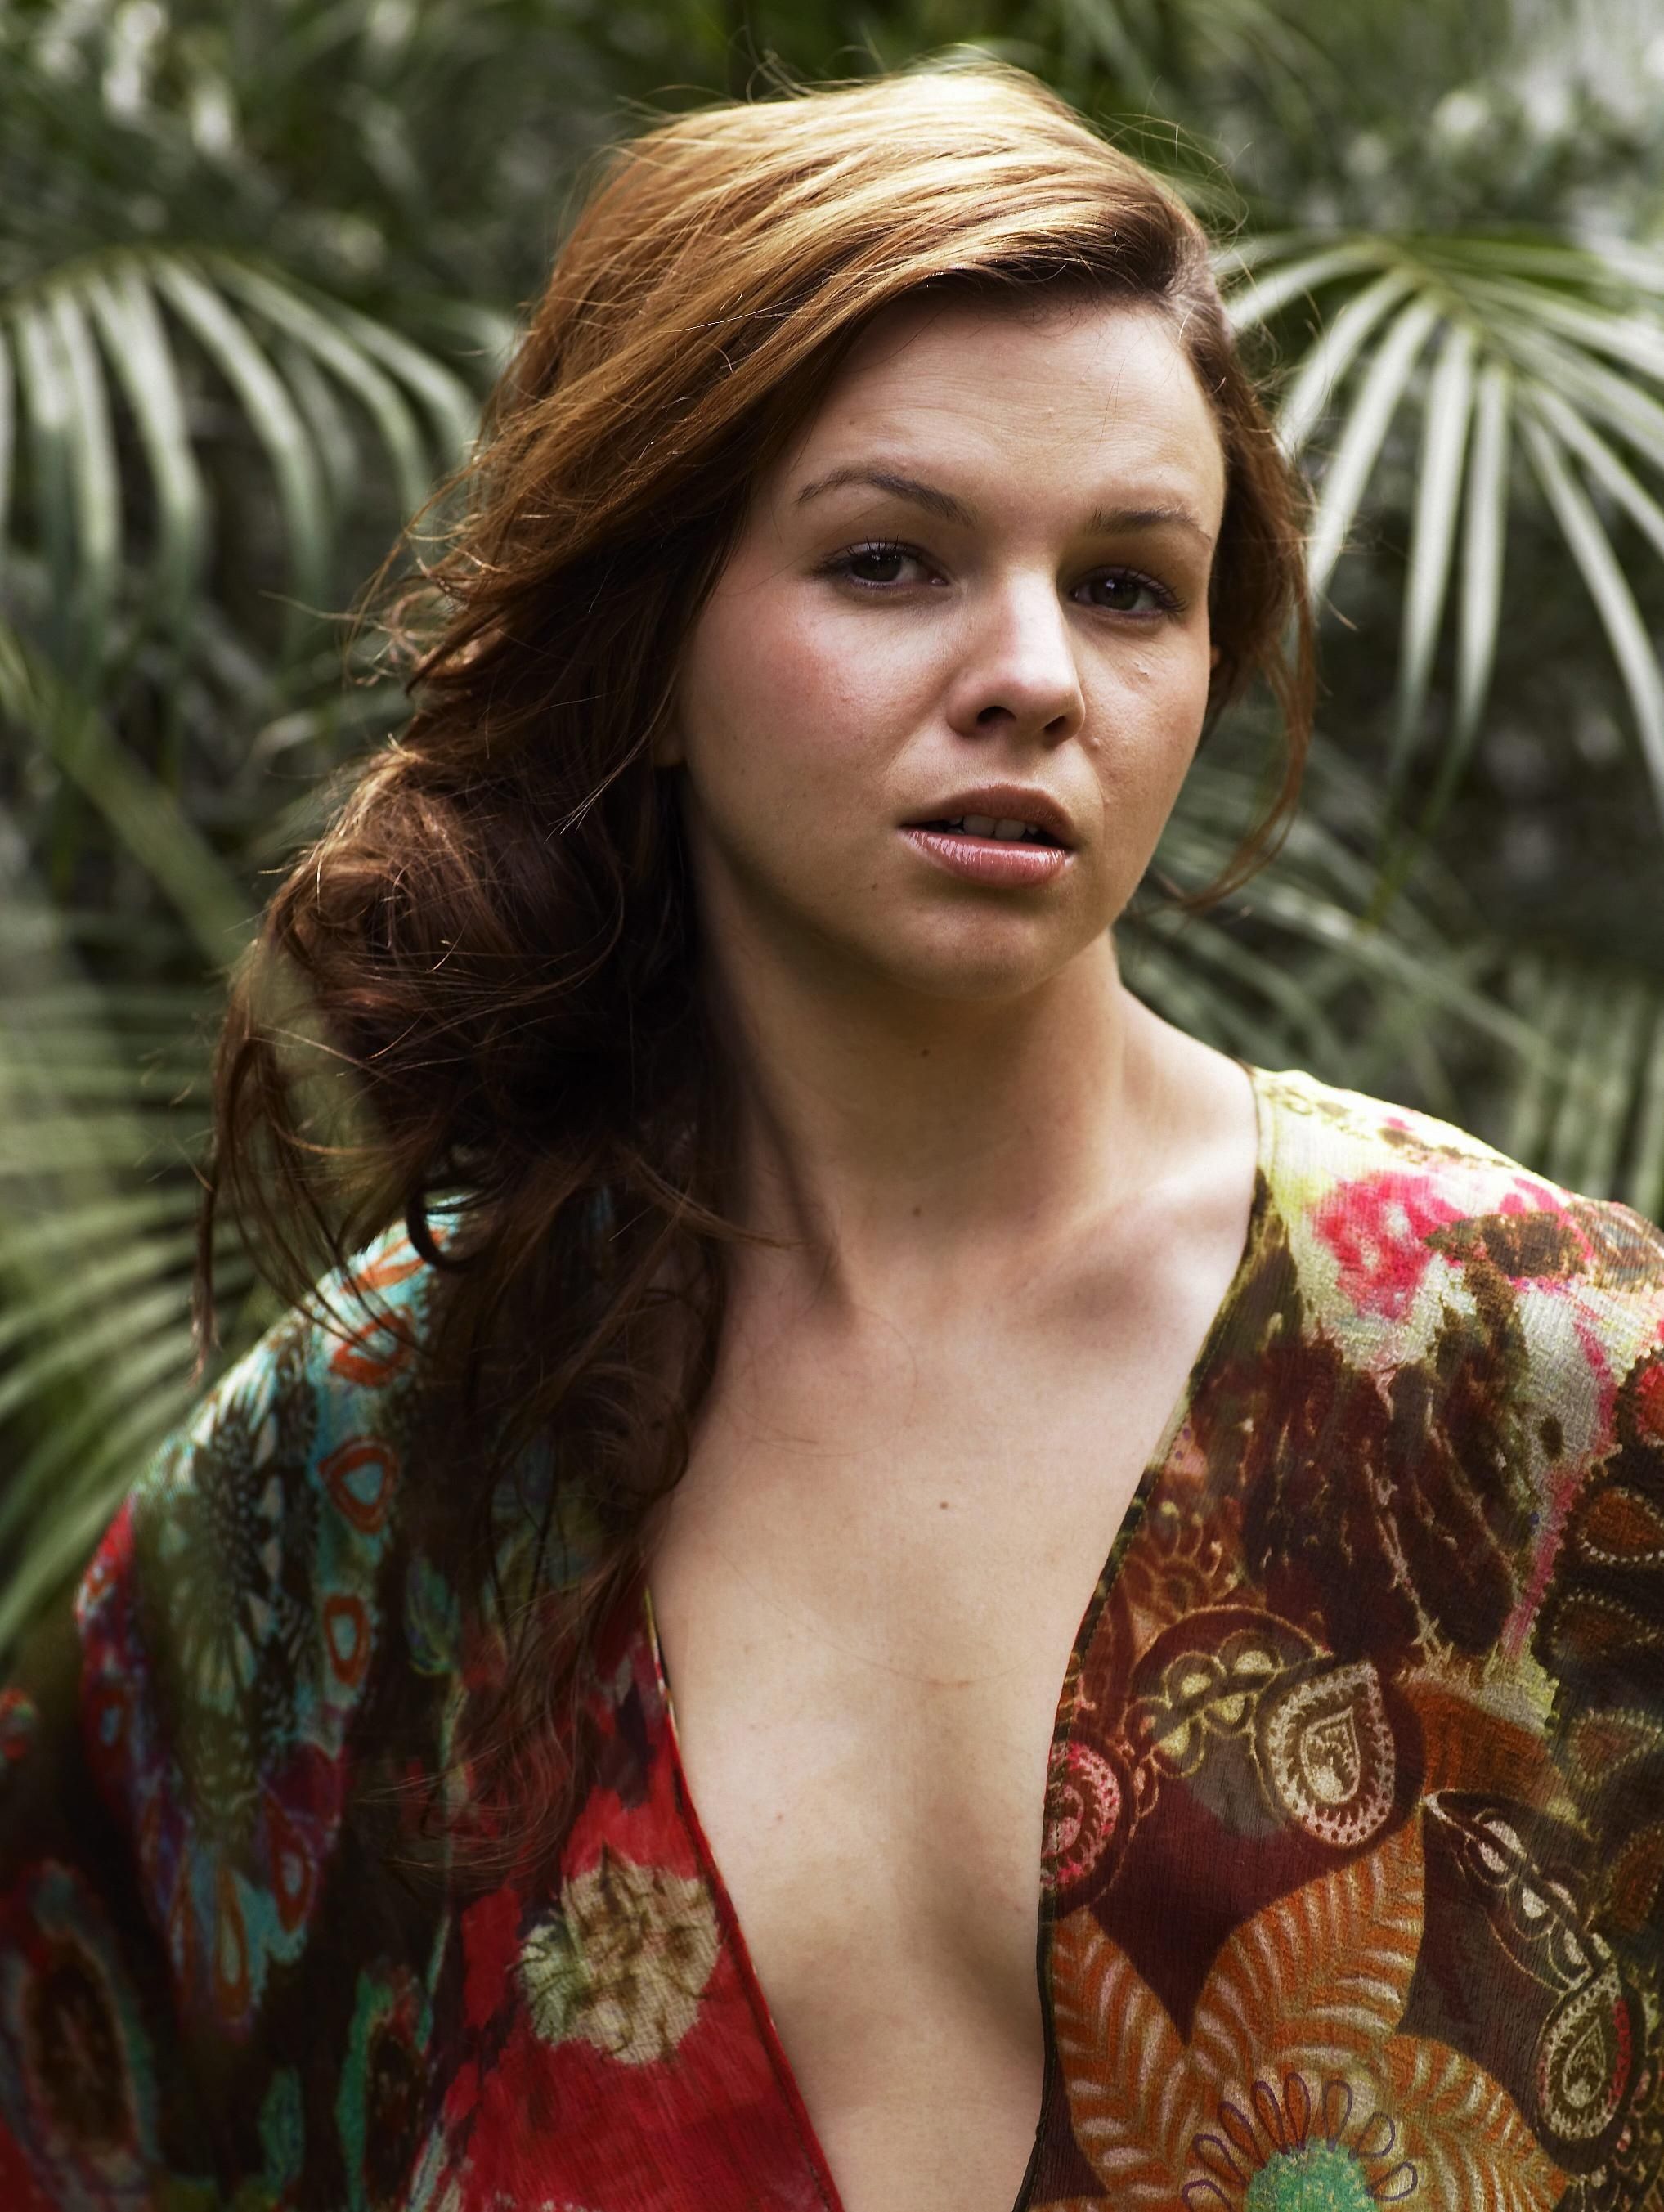 Hot TV Babe Of The Week.Amber Tamblyn.